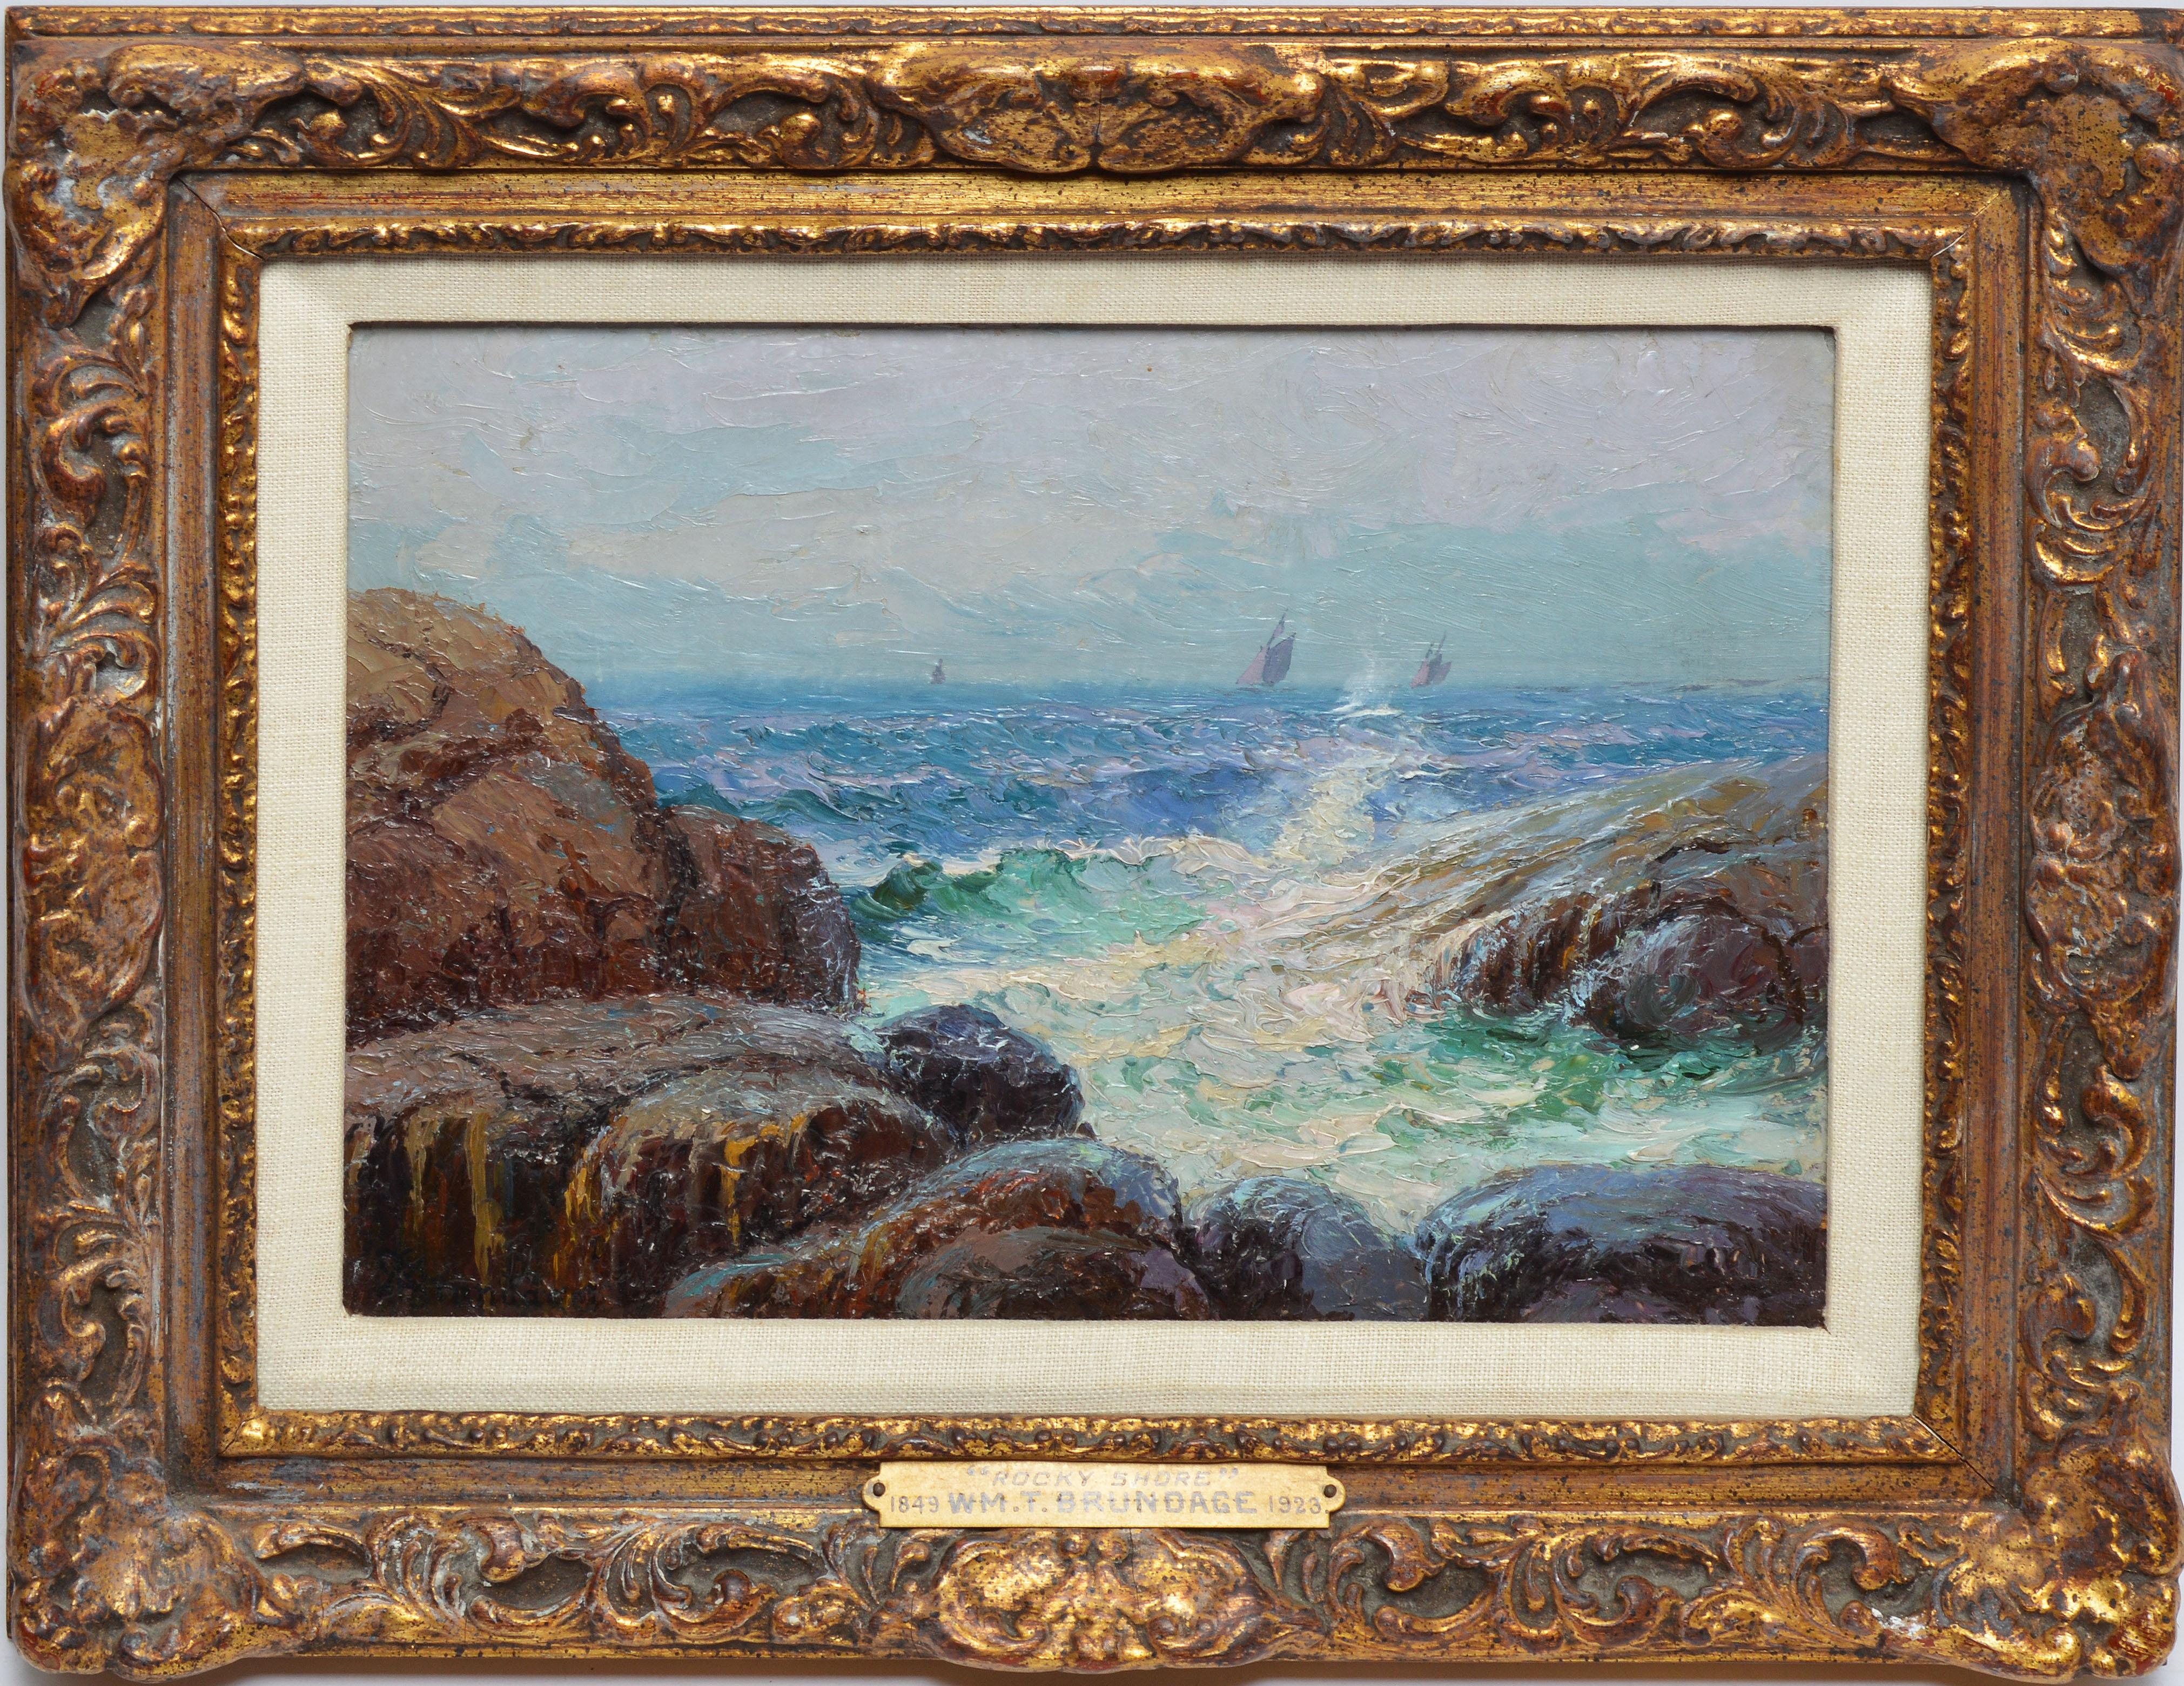 Antique American Impressionist oil painting of a beach.  Oil on board, circa 1900. Signed lower left.  Displayed in a vintage giltwood frame.  Image, 11.5"L x 8.5"H, overall 16"L x 13"H.